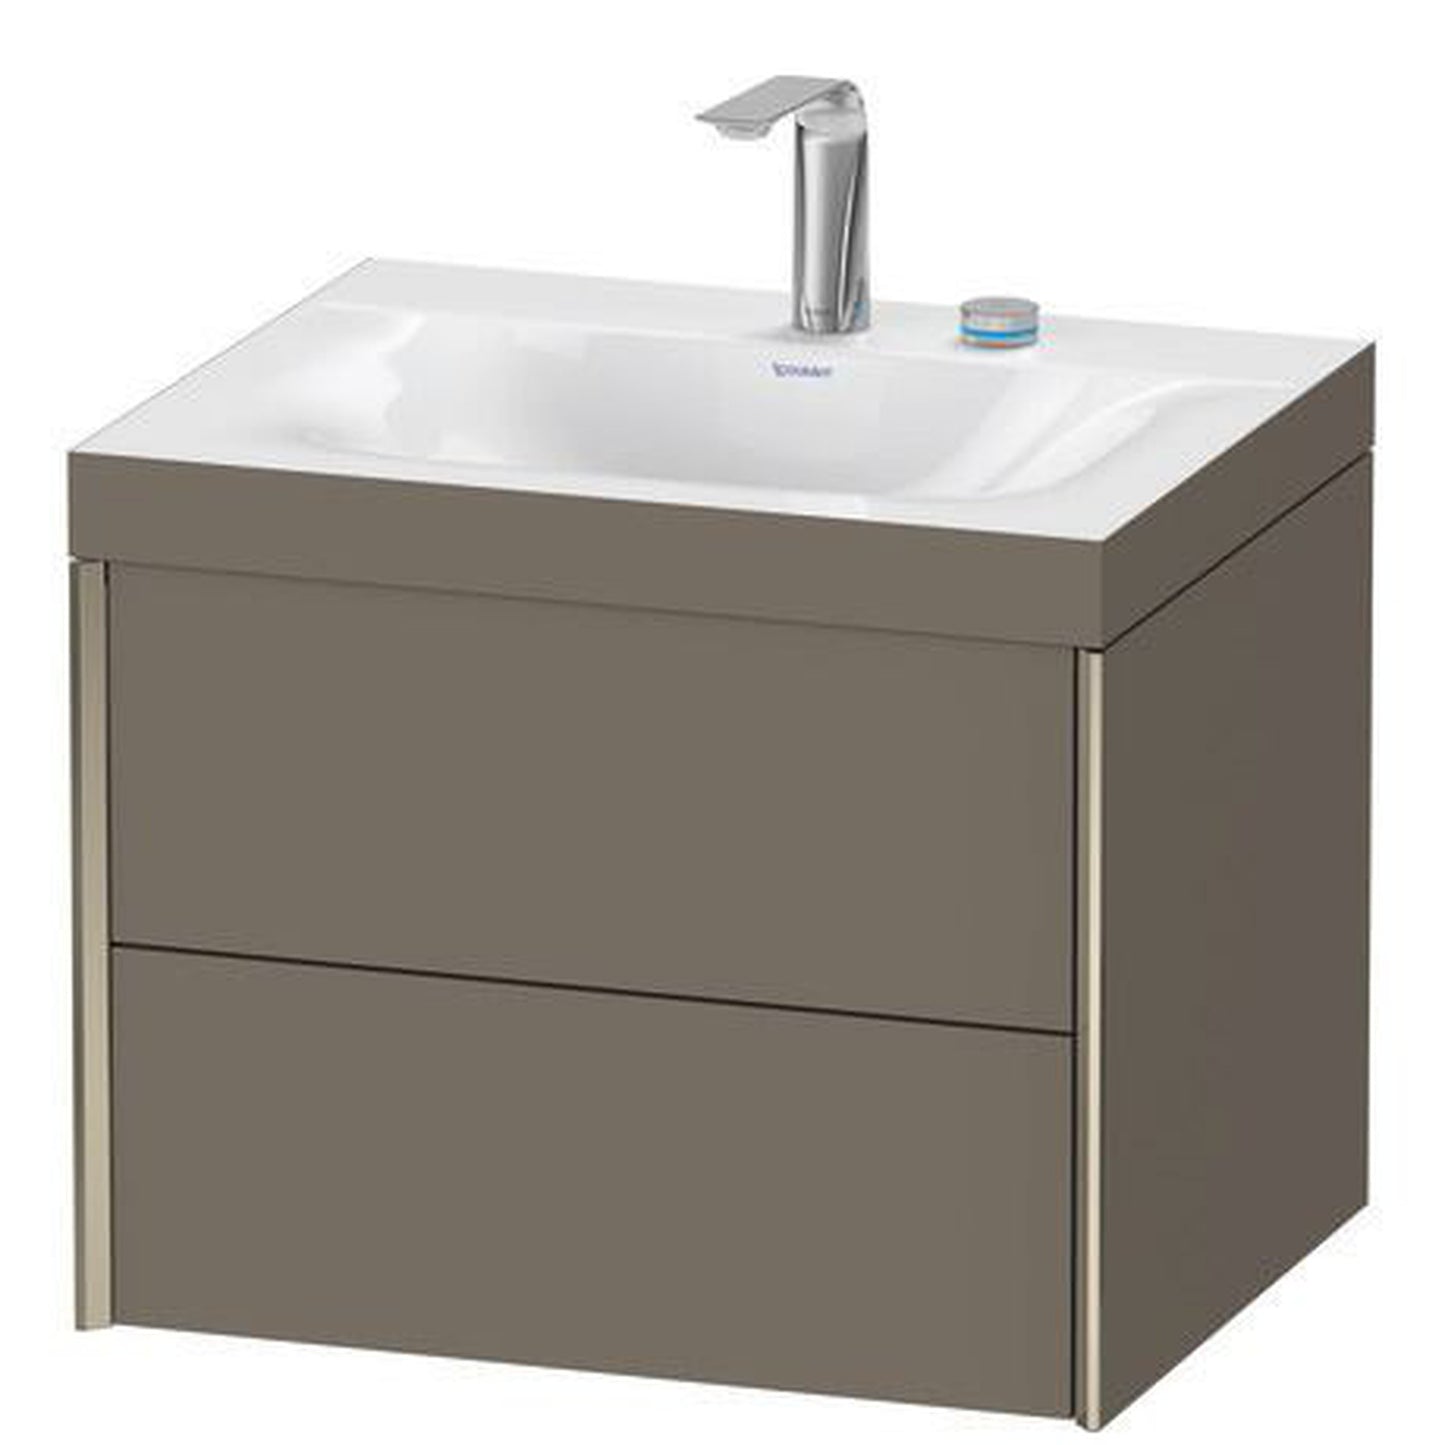 Duravit Xviu 24" x 20" x 19" Two Drawer C-Bonded Wall-Mount Vanity Kit With Two Tap Holes, Flannel Gray (XV4614EB190C)